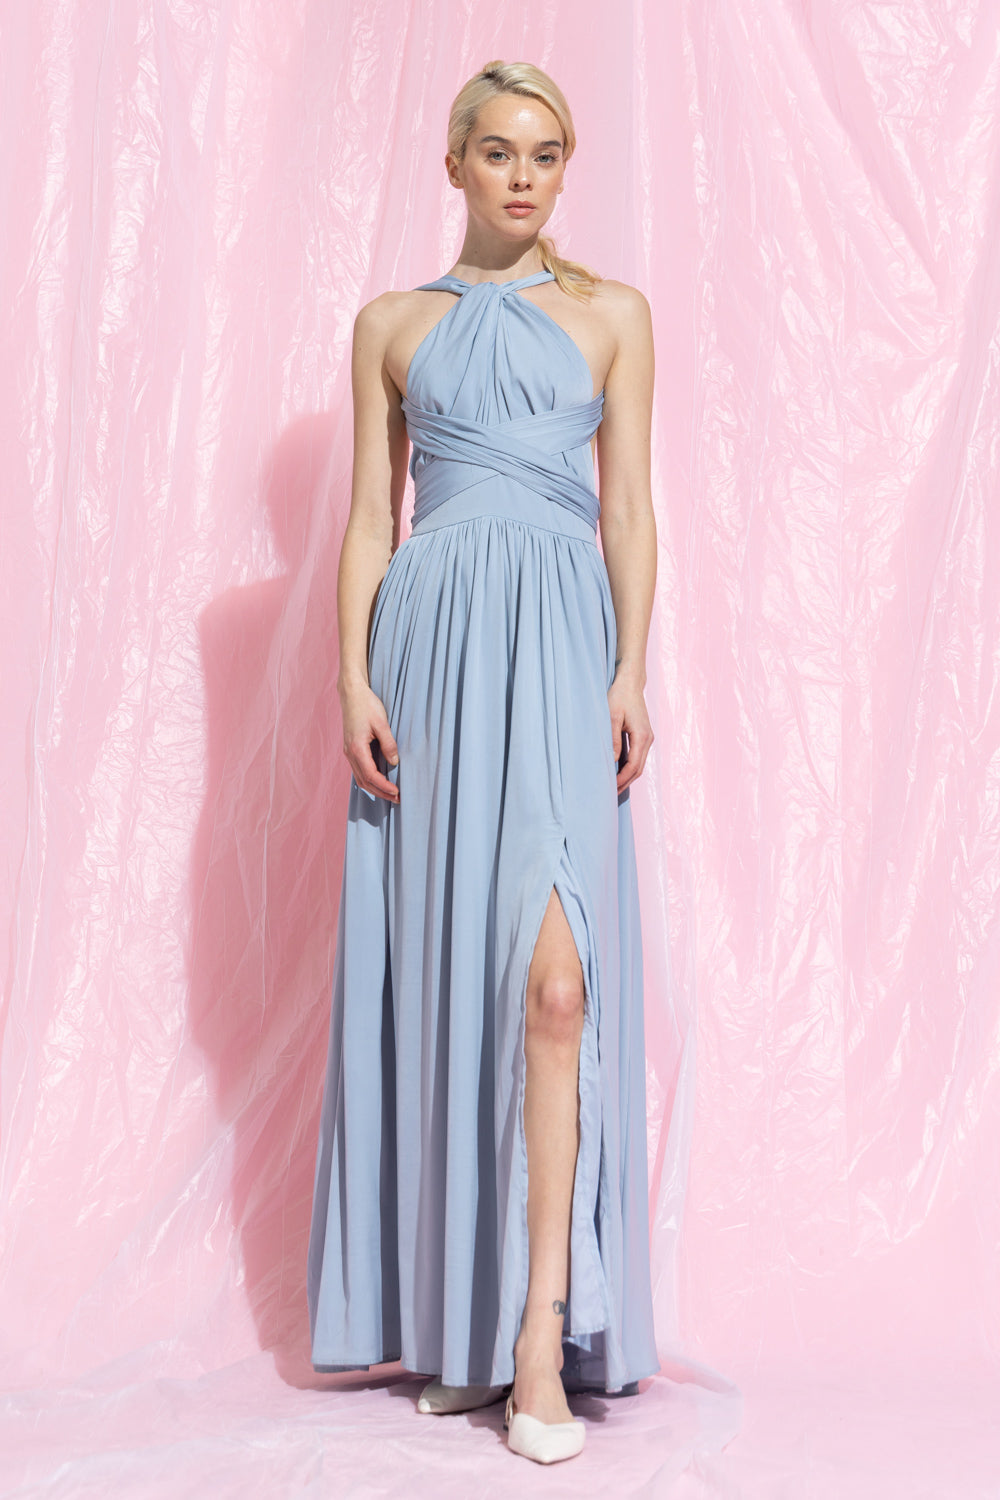 Icy Blue Halter Gown